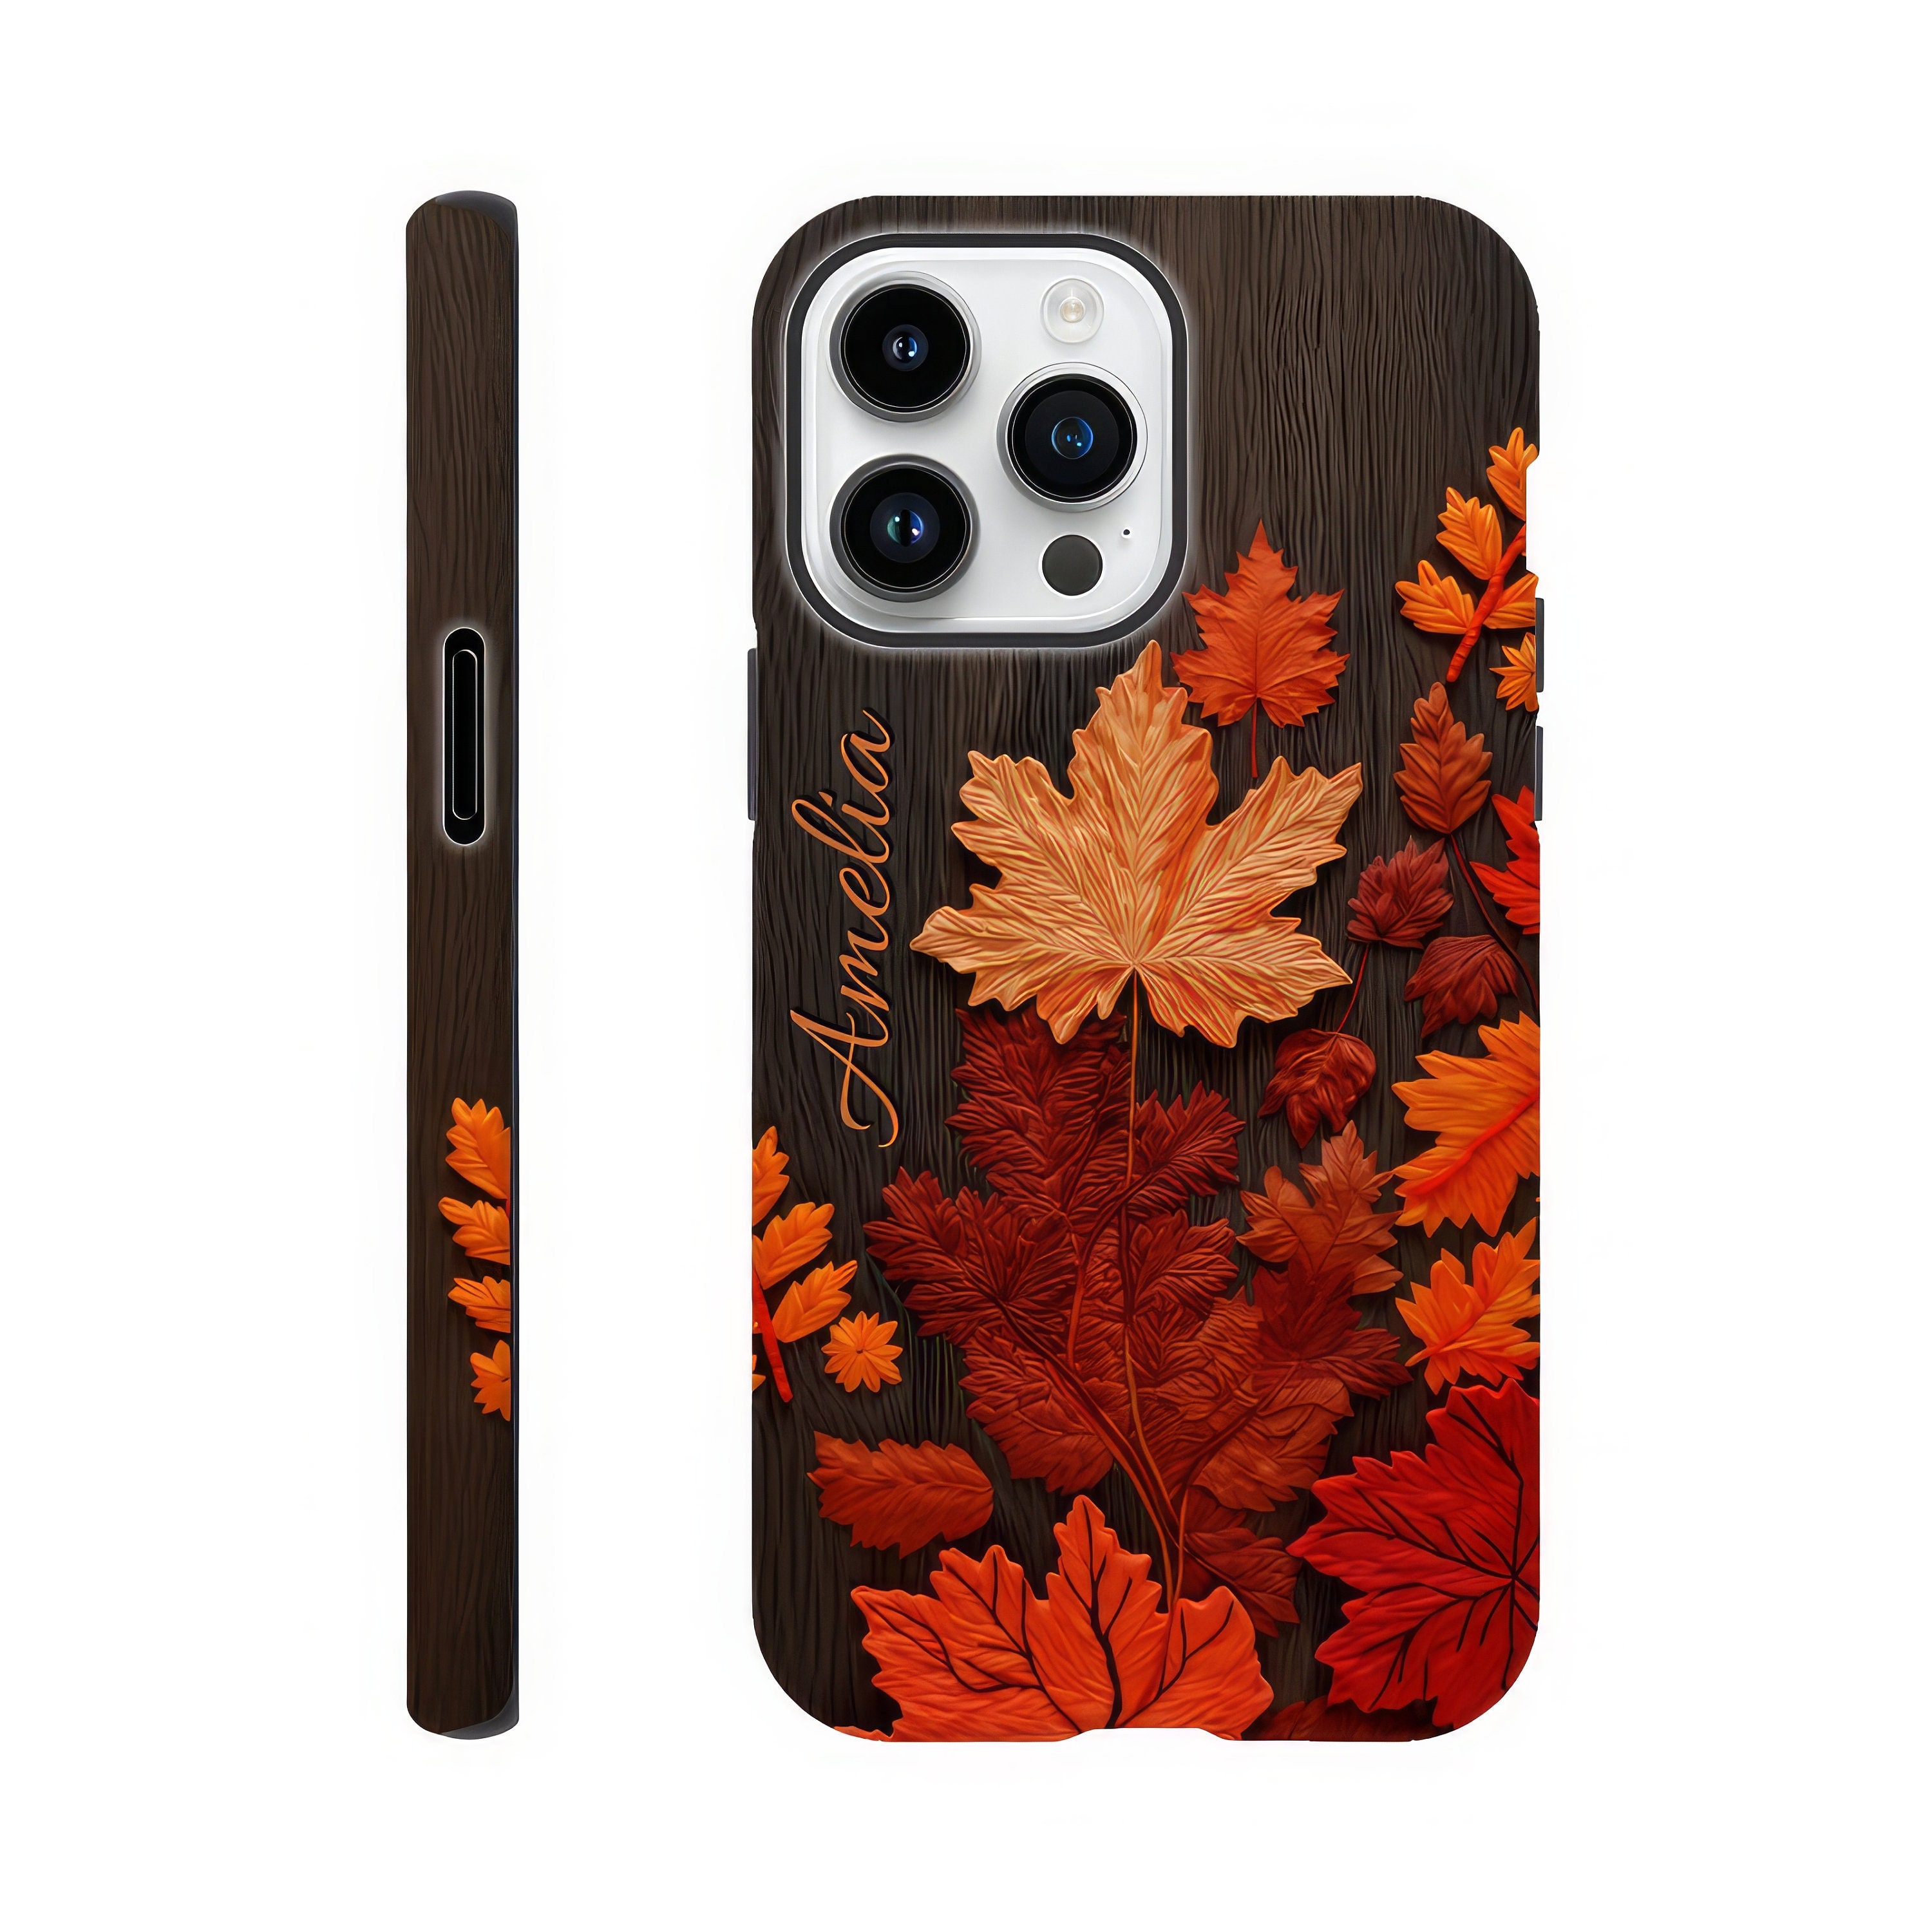 Season Made - Online Shop for Phone Cases, Mobile Accessories